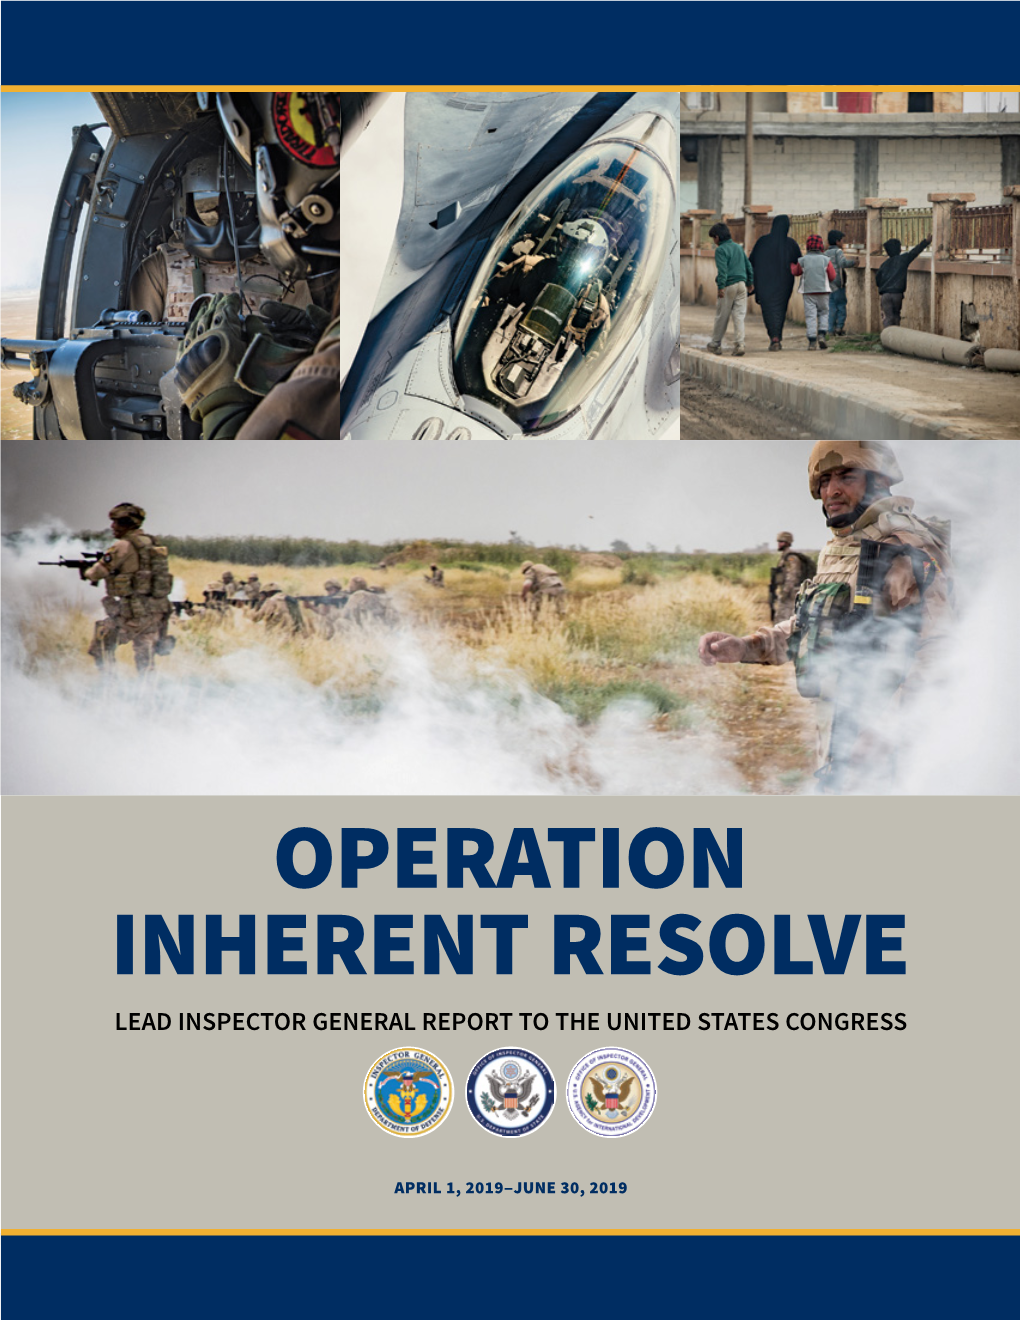 Lead Inspector General Quarterly Report on Operation Inherent Resolve (OIR)